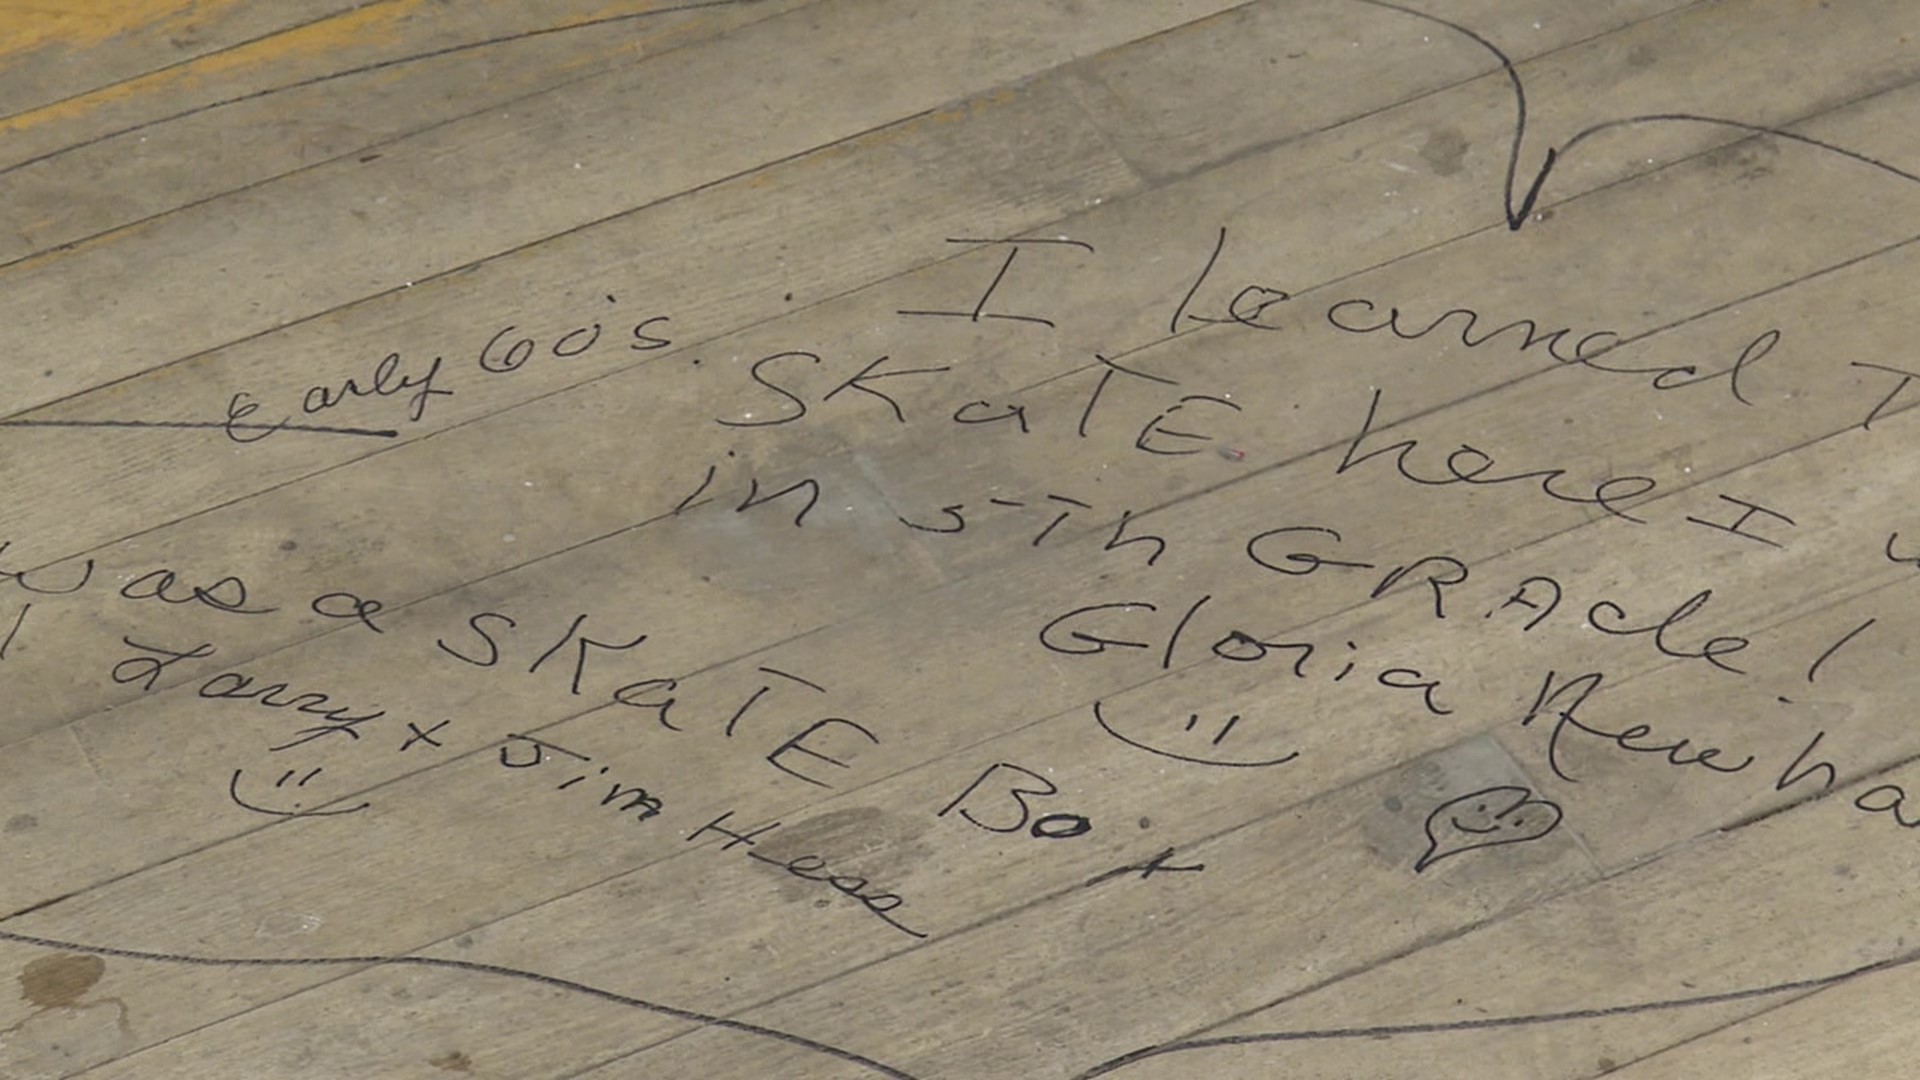 A grocery store in Benton known to many as a roller skating rink in the 1960s is offering residents a chance to leave one last mark on the floors before renovations.